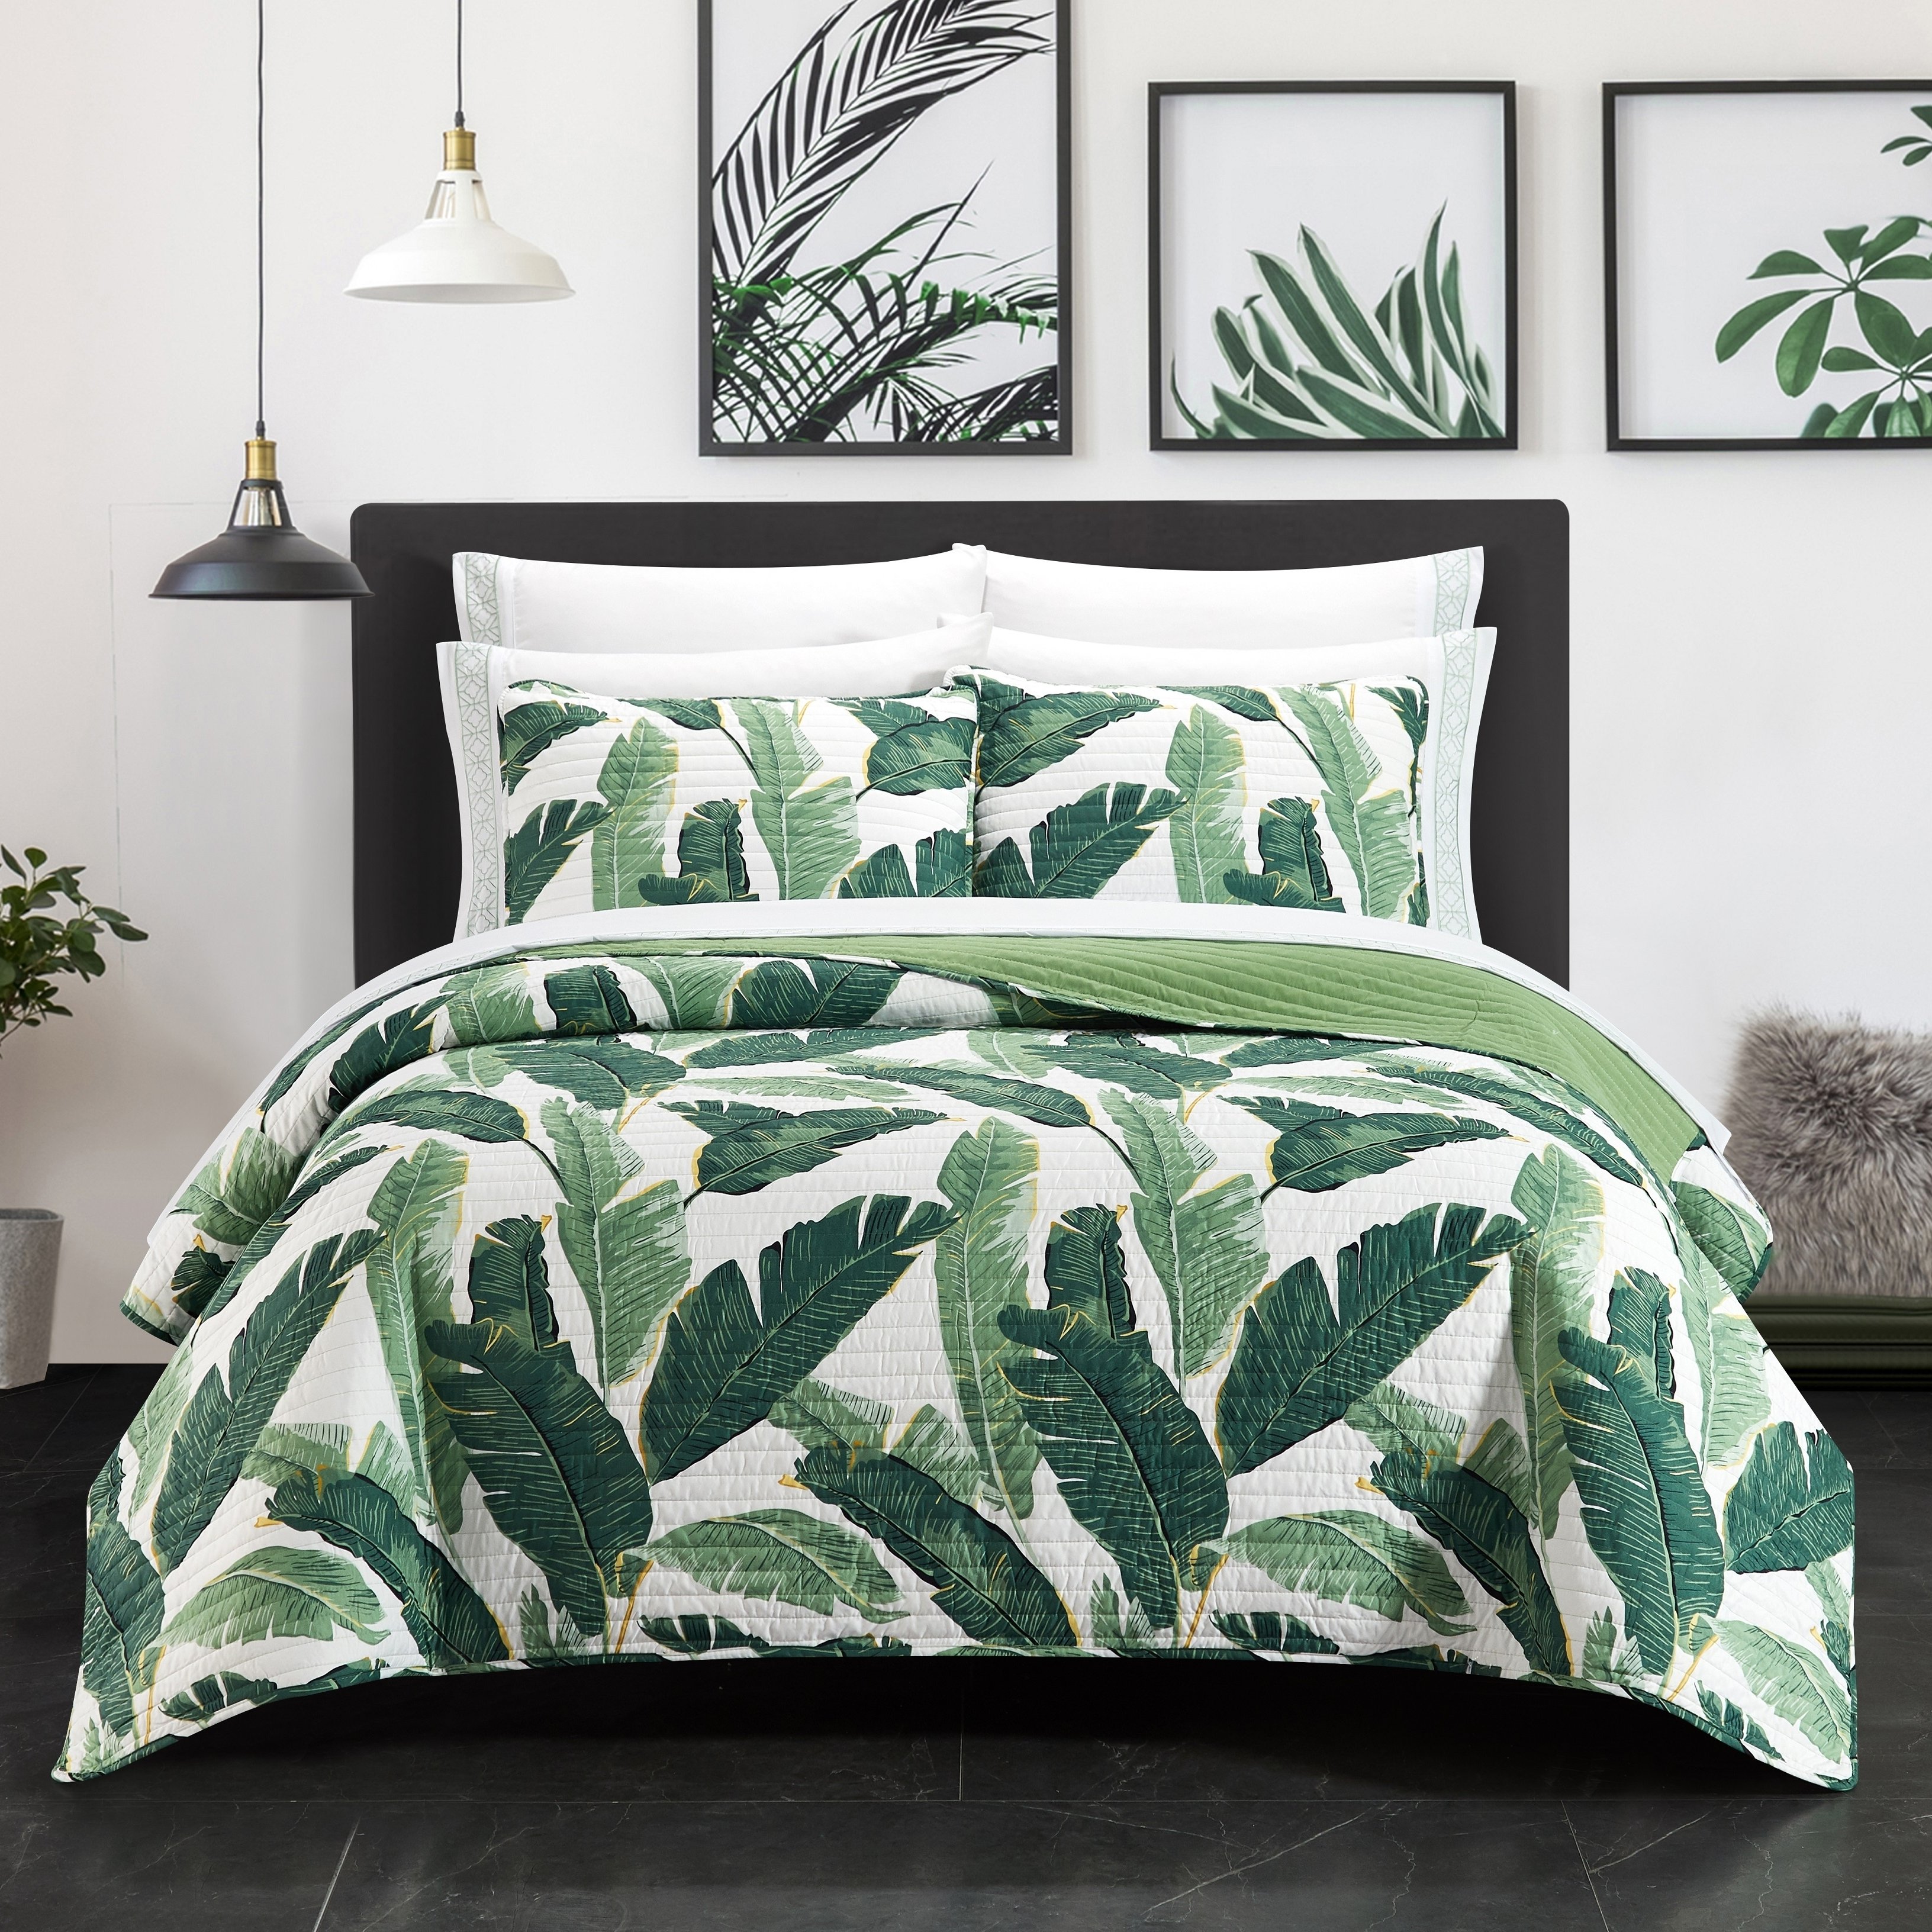 Palm Spring 9 Or 6 Piece Quilt Set Watercolor Floral Pattern Print Bed In A Bag - Green, Full